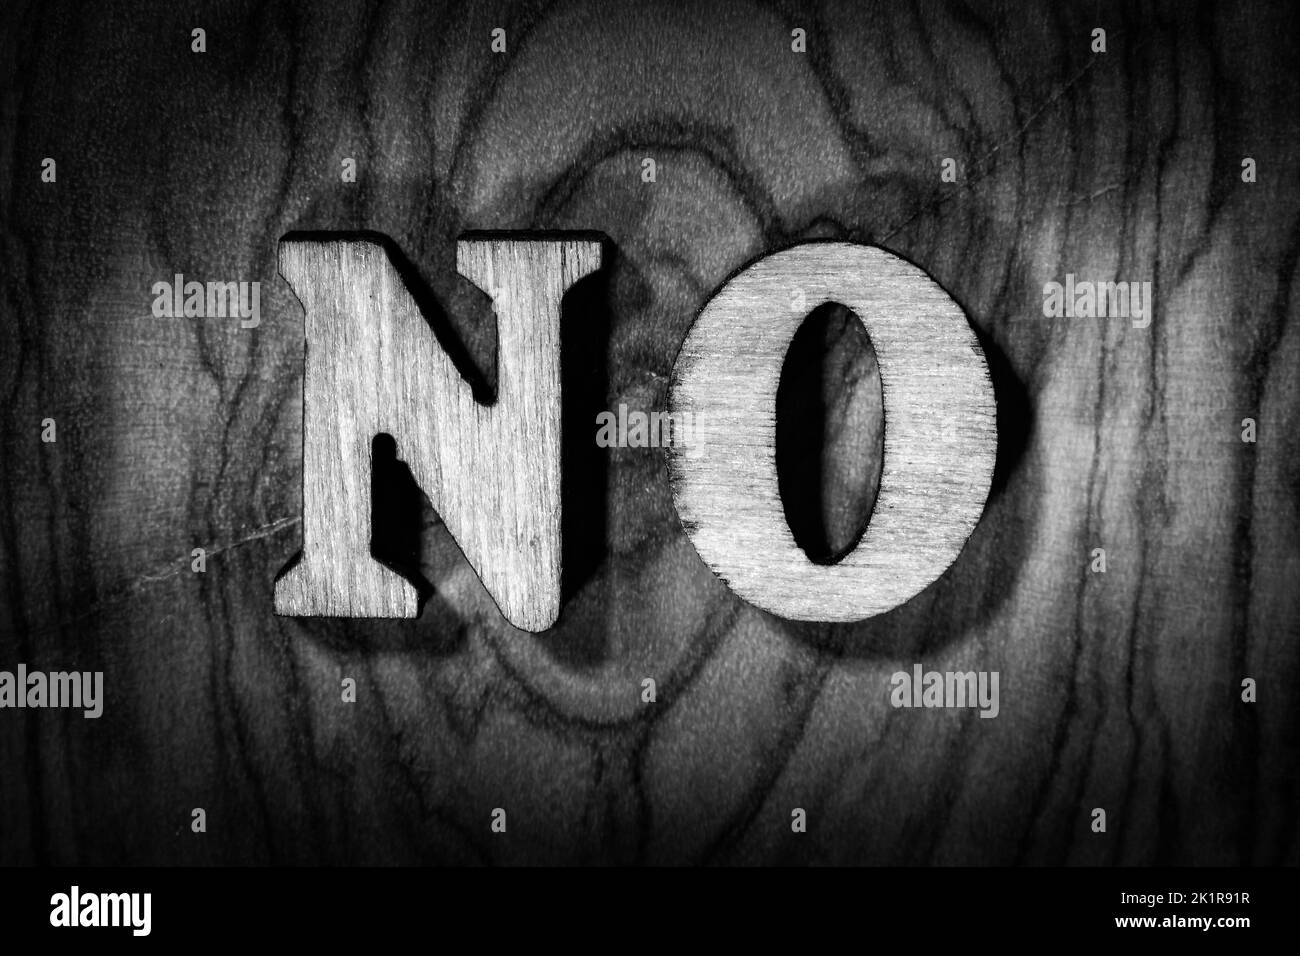 'No' word - Inscription by wooden letters close up. Black and white image Stock Photo